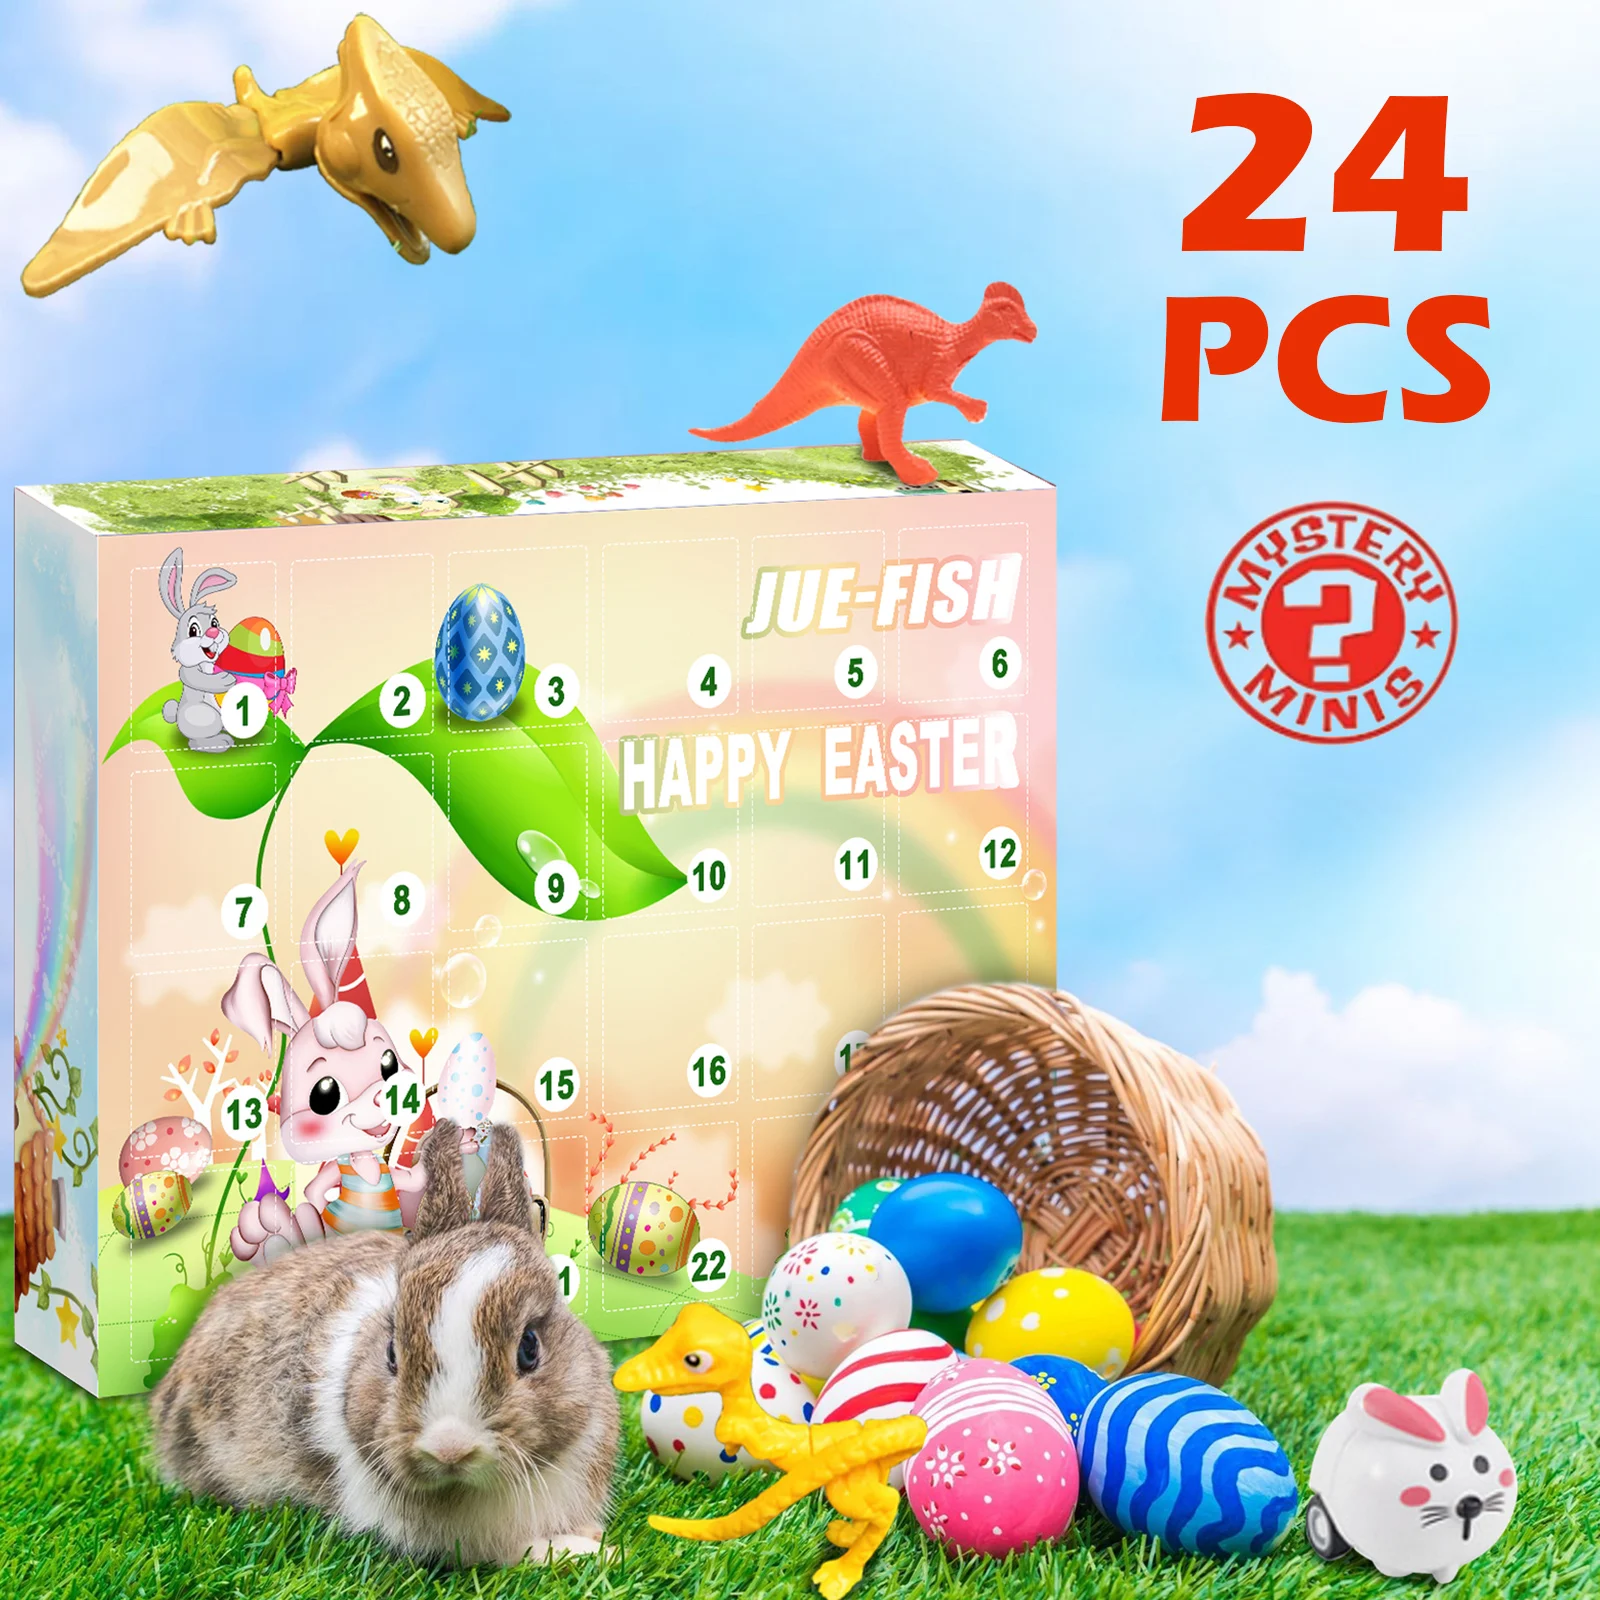 

Advent Calendar 24 Days Easter Countdown Advent Calendar Surprise Toys Including 24 Animal Characters in 24 Windows Miniature S